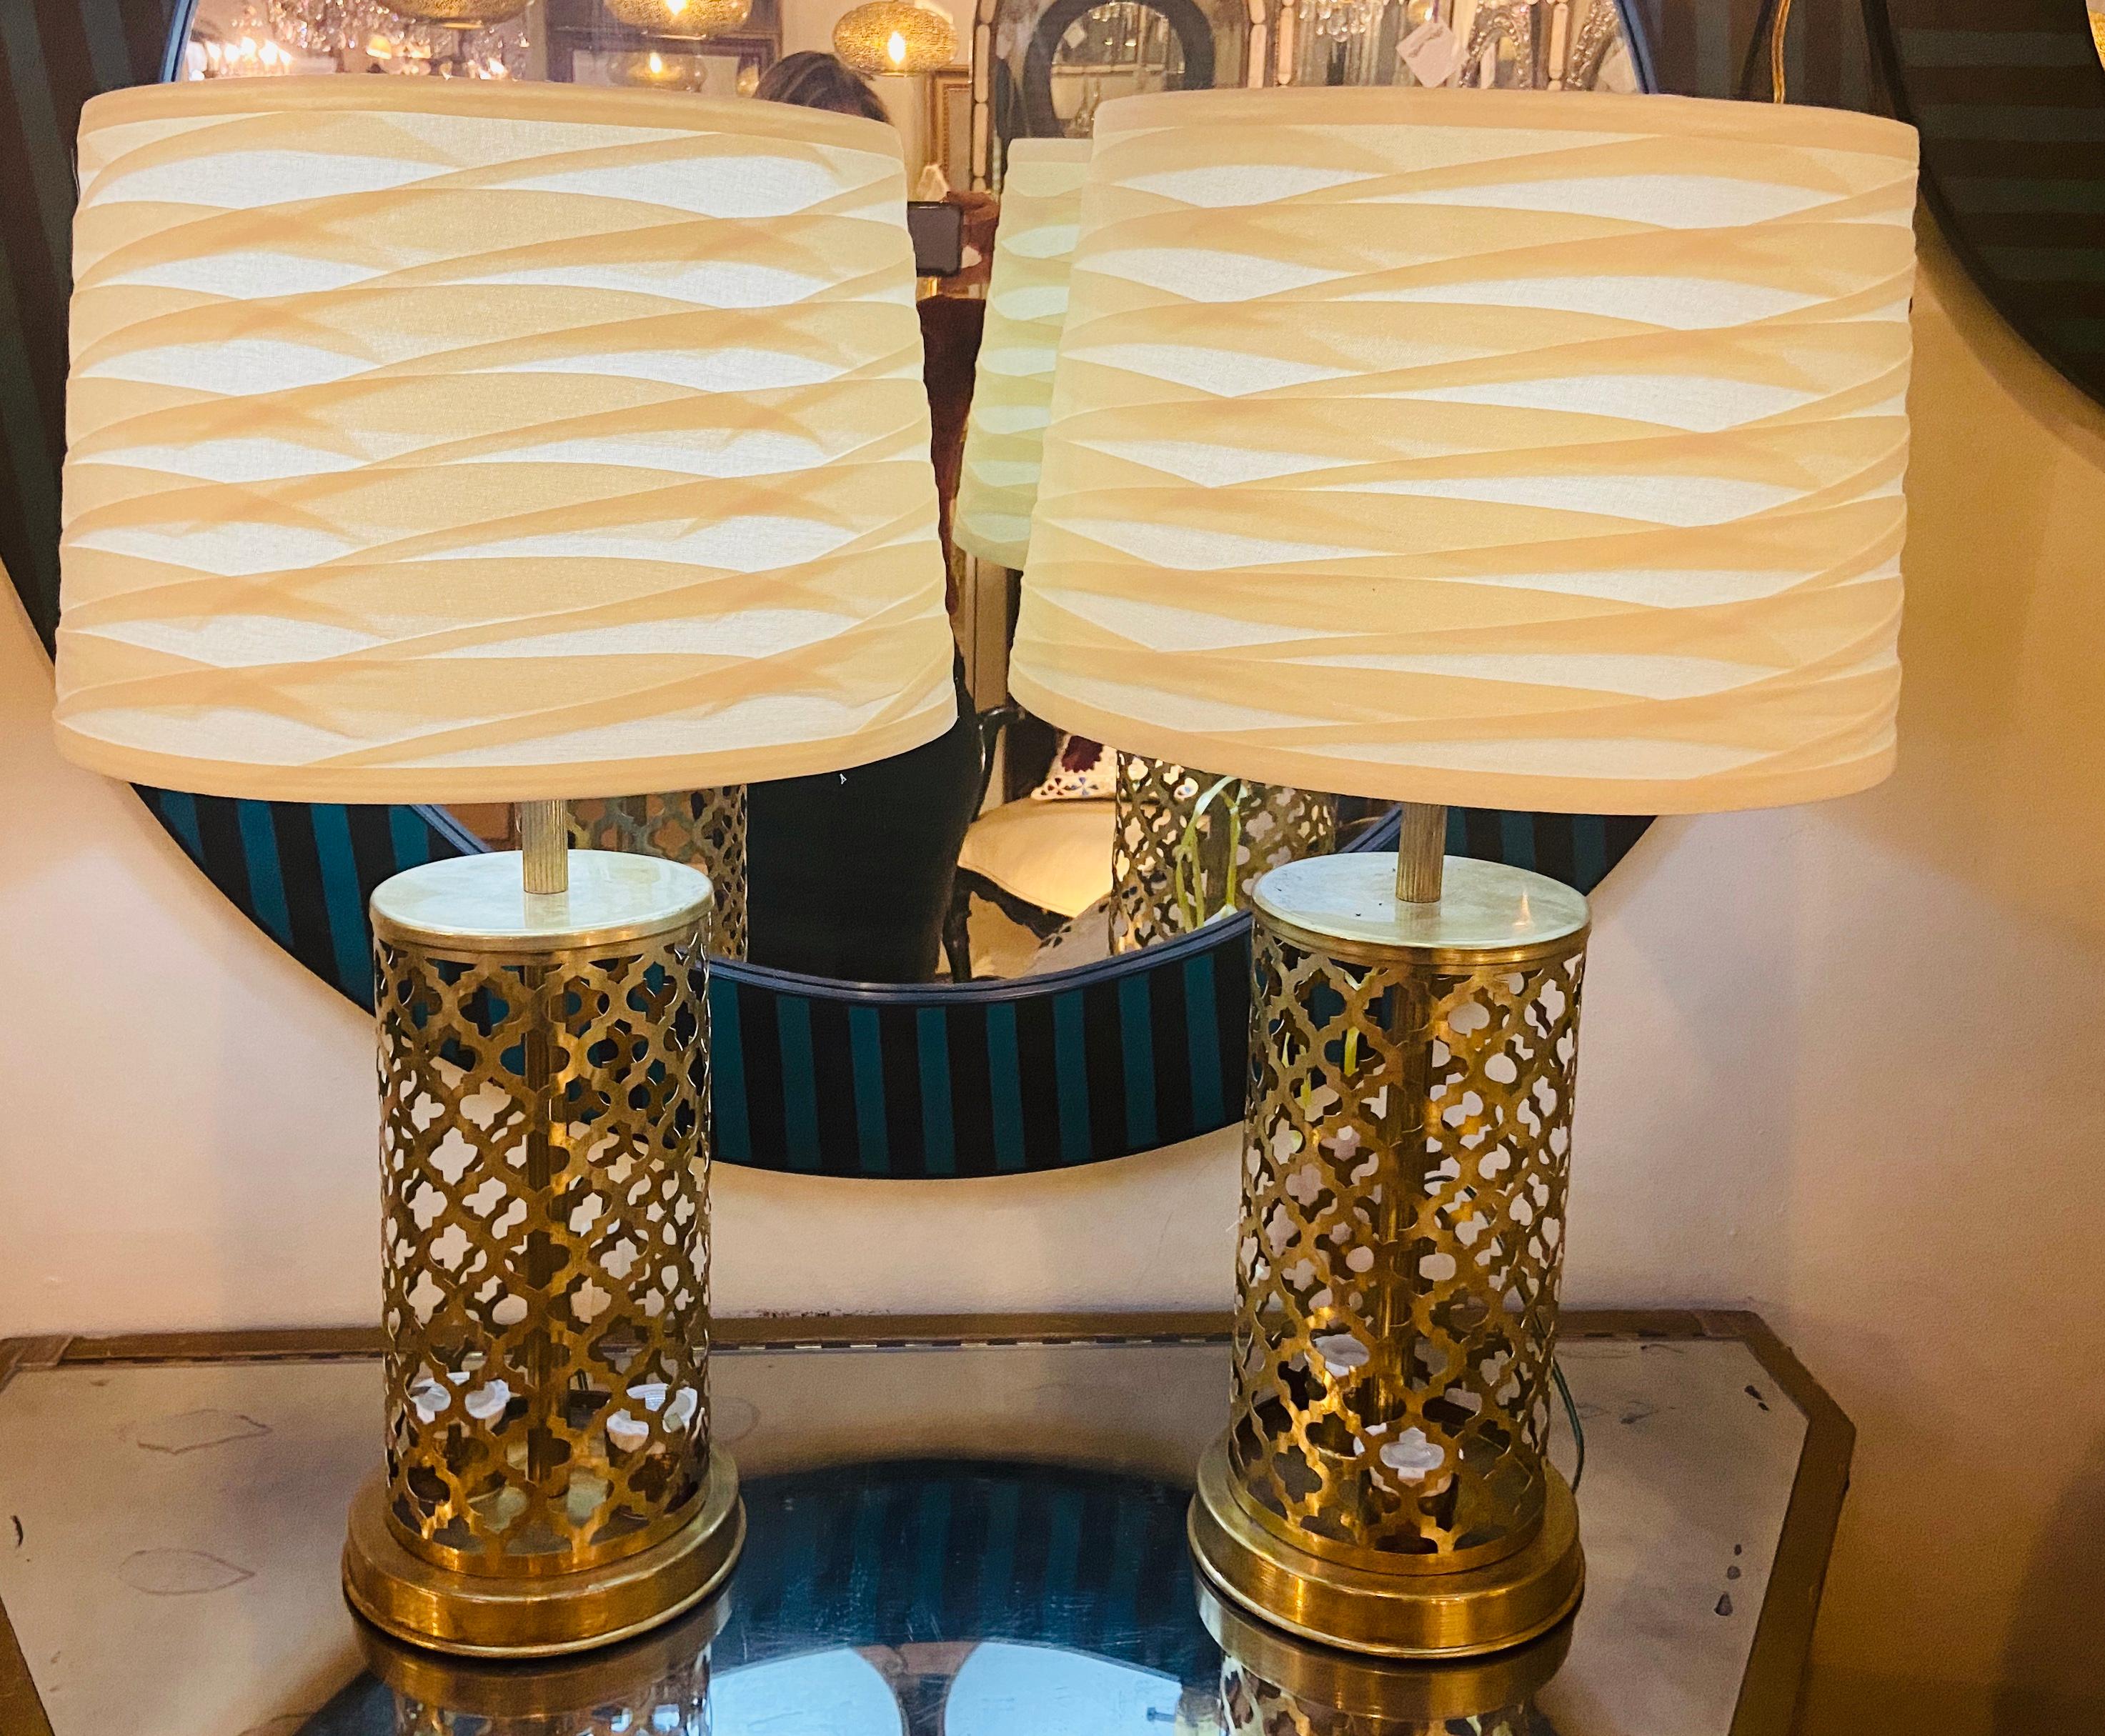 Modern Moroccan gold brass table lamp handmade with bottom and upper light, a pair
This pair of lamps is made of  fine brass and hand-tooled in an elegant and modern Moorish design. Each lamp features two bottom lights and upper light which enables